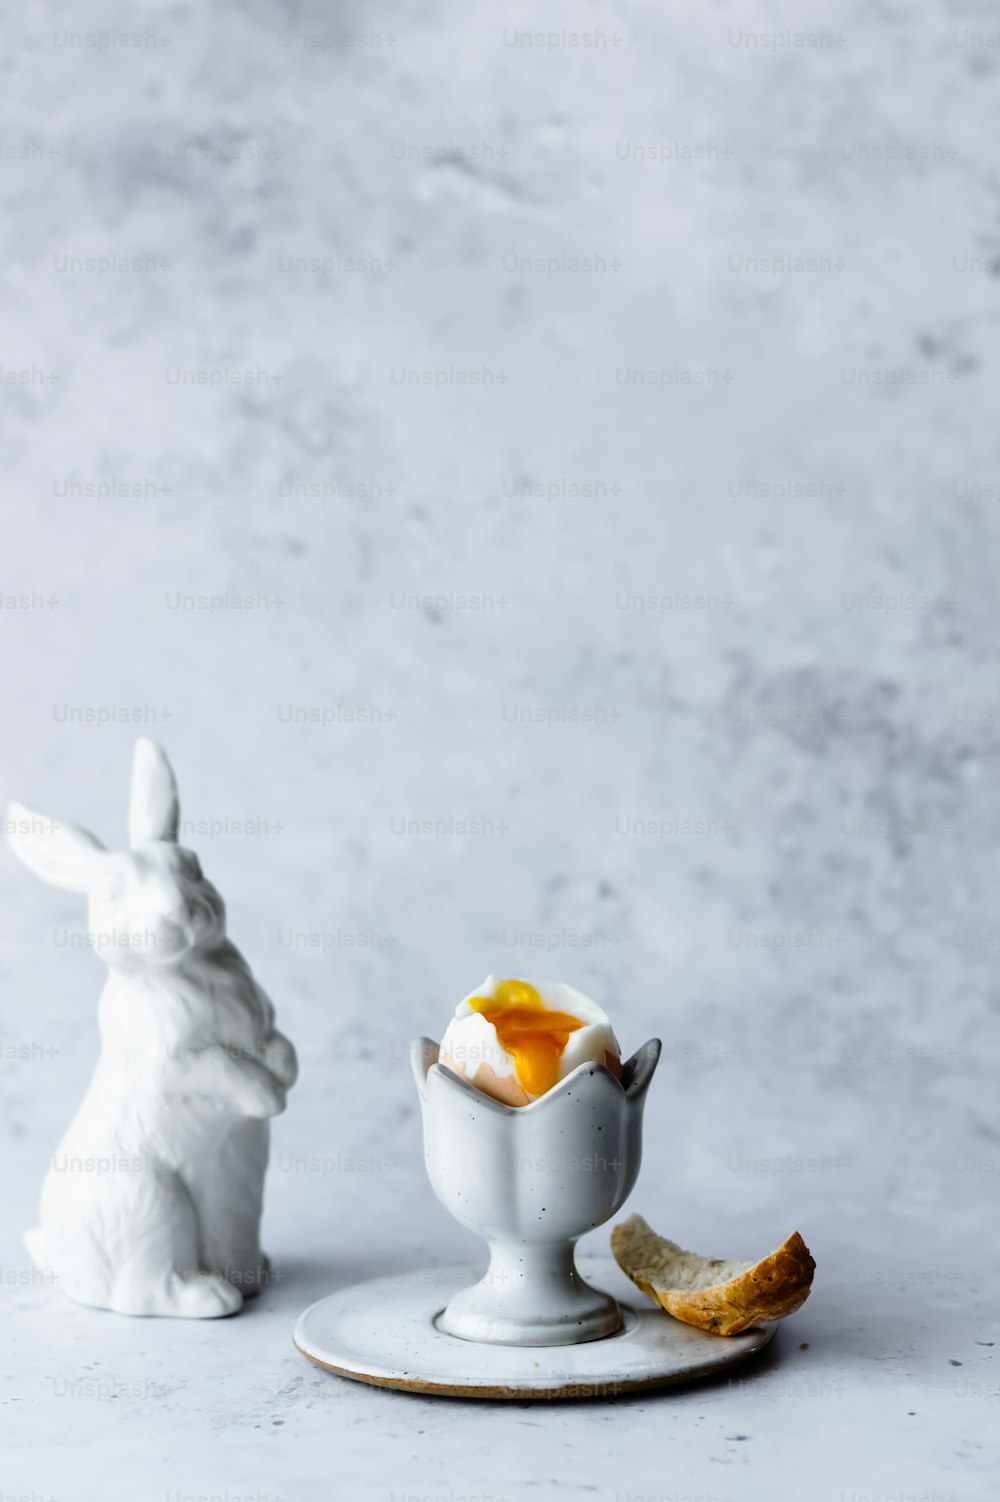 a white bunny figurine sitting next to a bowl of eggs